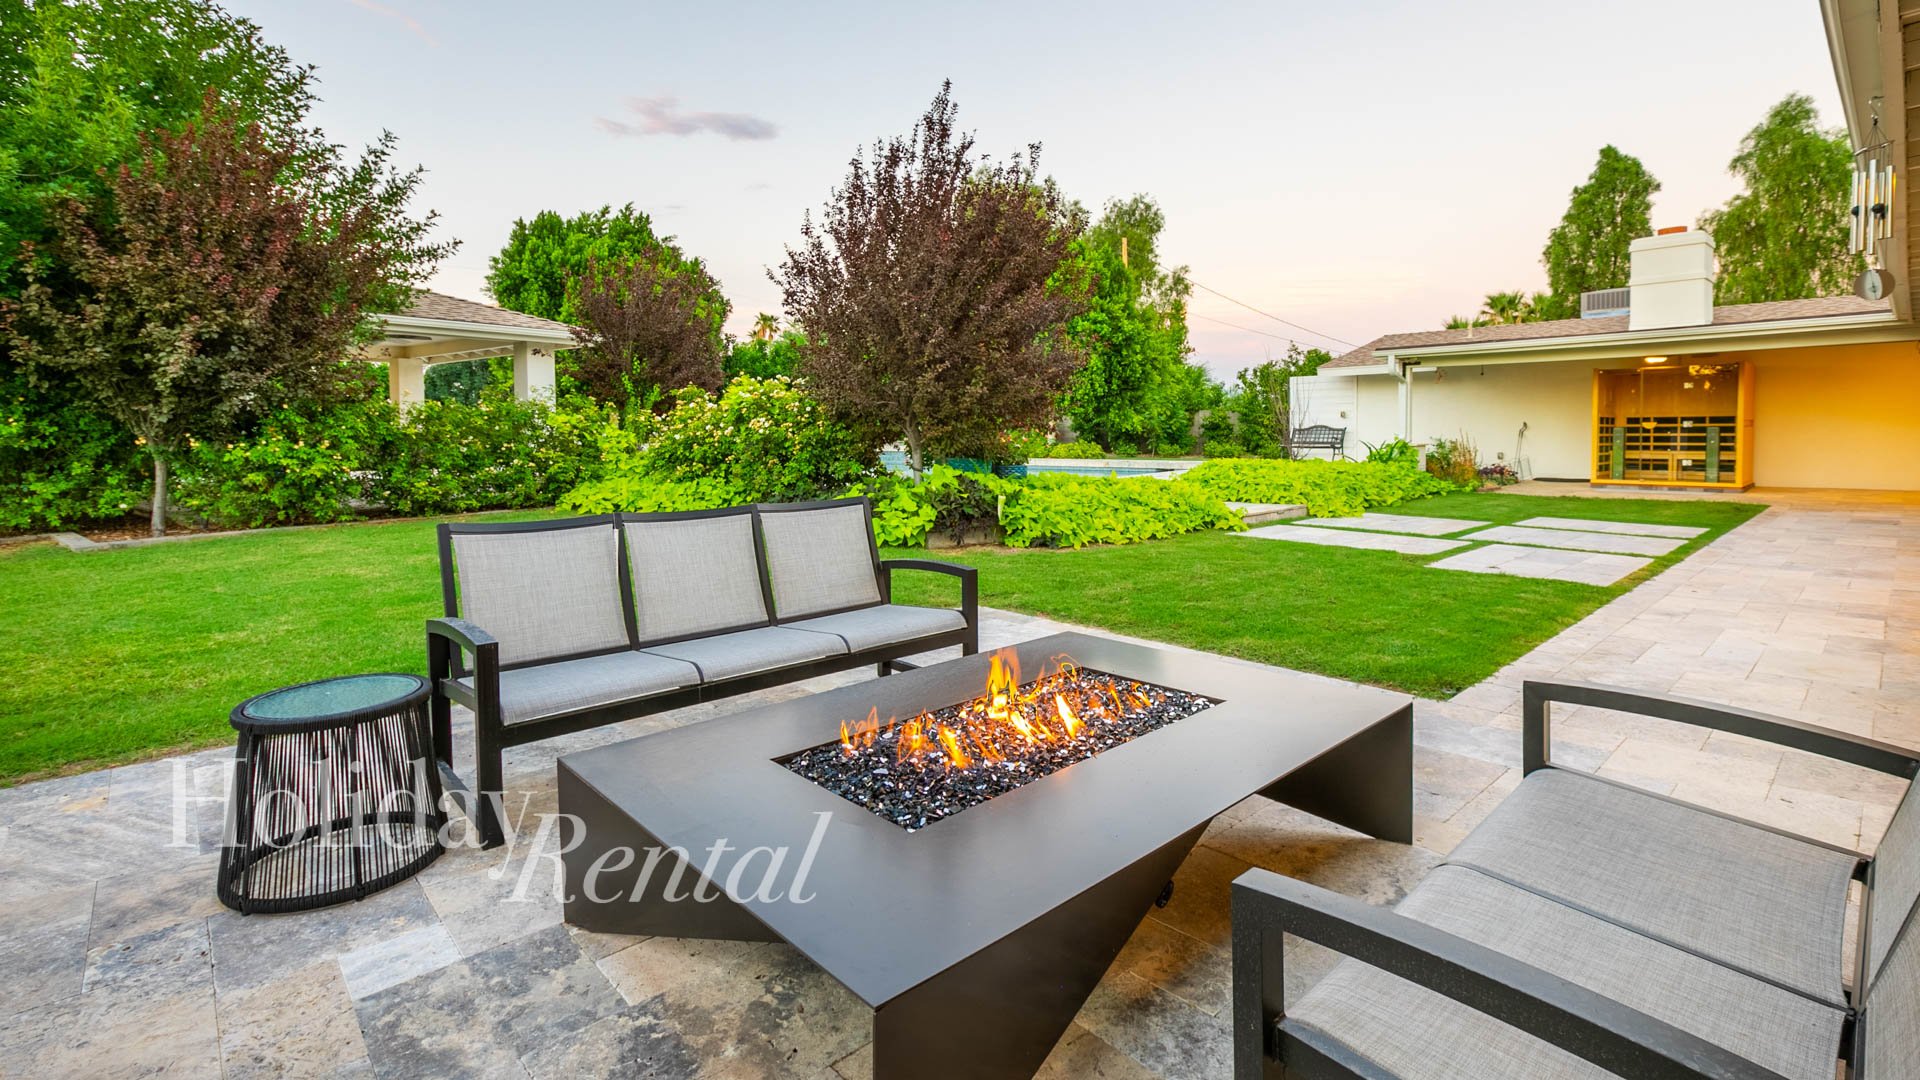 Plenty of room for all to gather and relax on the luxurious backyard patio, complete with an outdoor TV, fire pit, and protected from the elements by an overhang